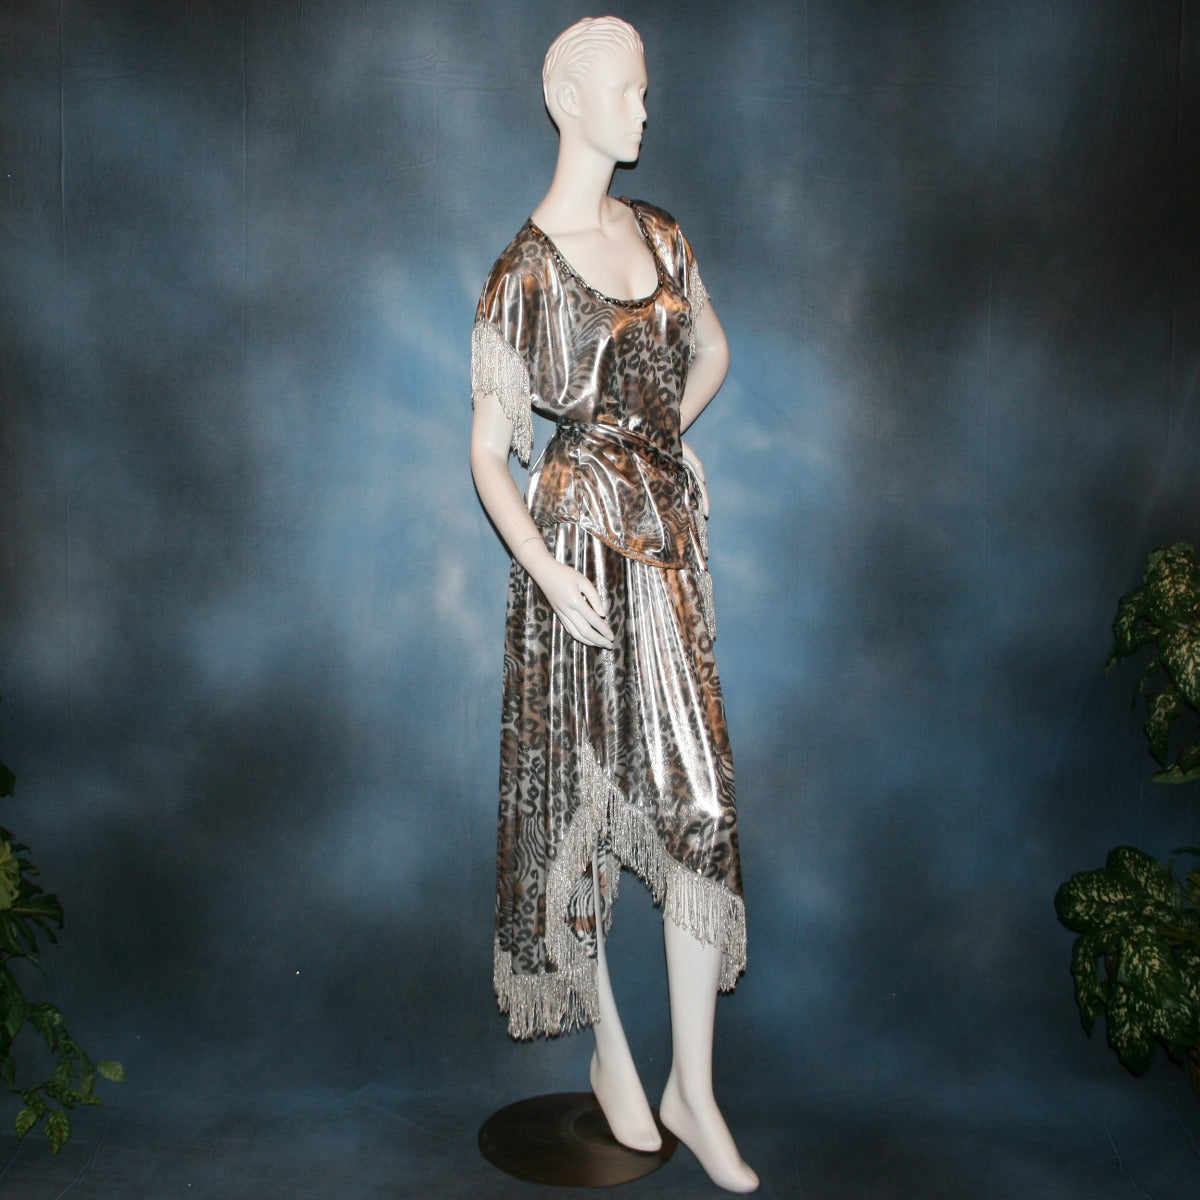 side view of Silver two panel Latin/rhythm skirt & top that has hand beading on neck edge of textured silver beads, with metallic fringe, was created of a leopard print knit with silver metallic on one side.